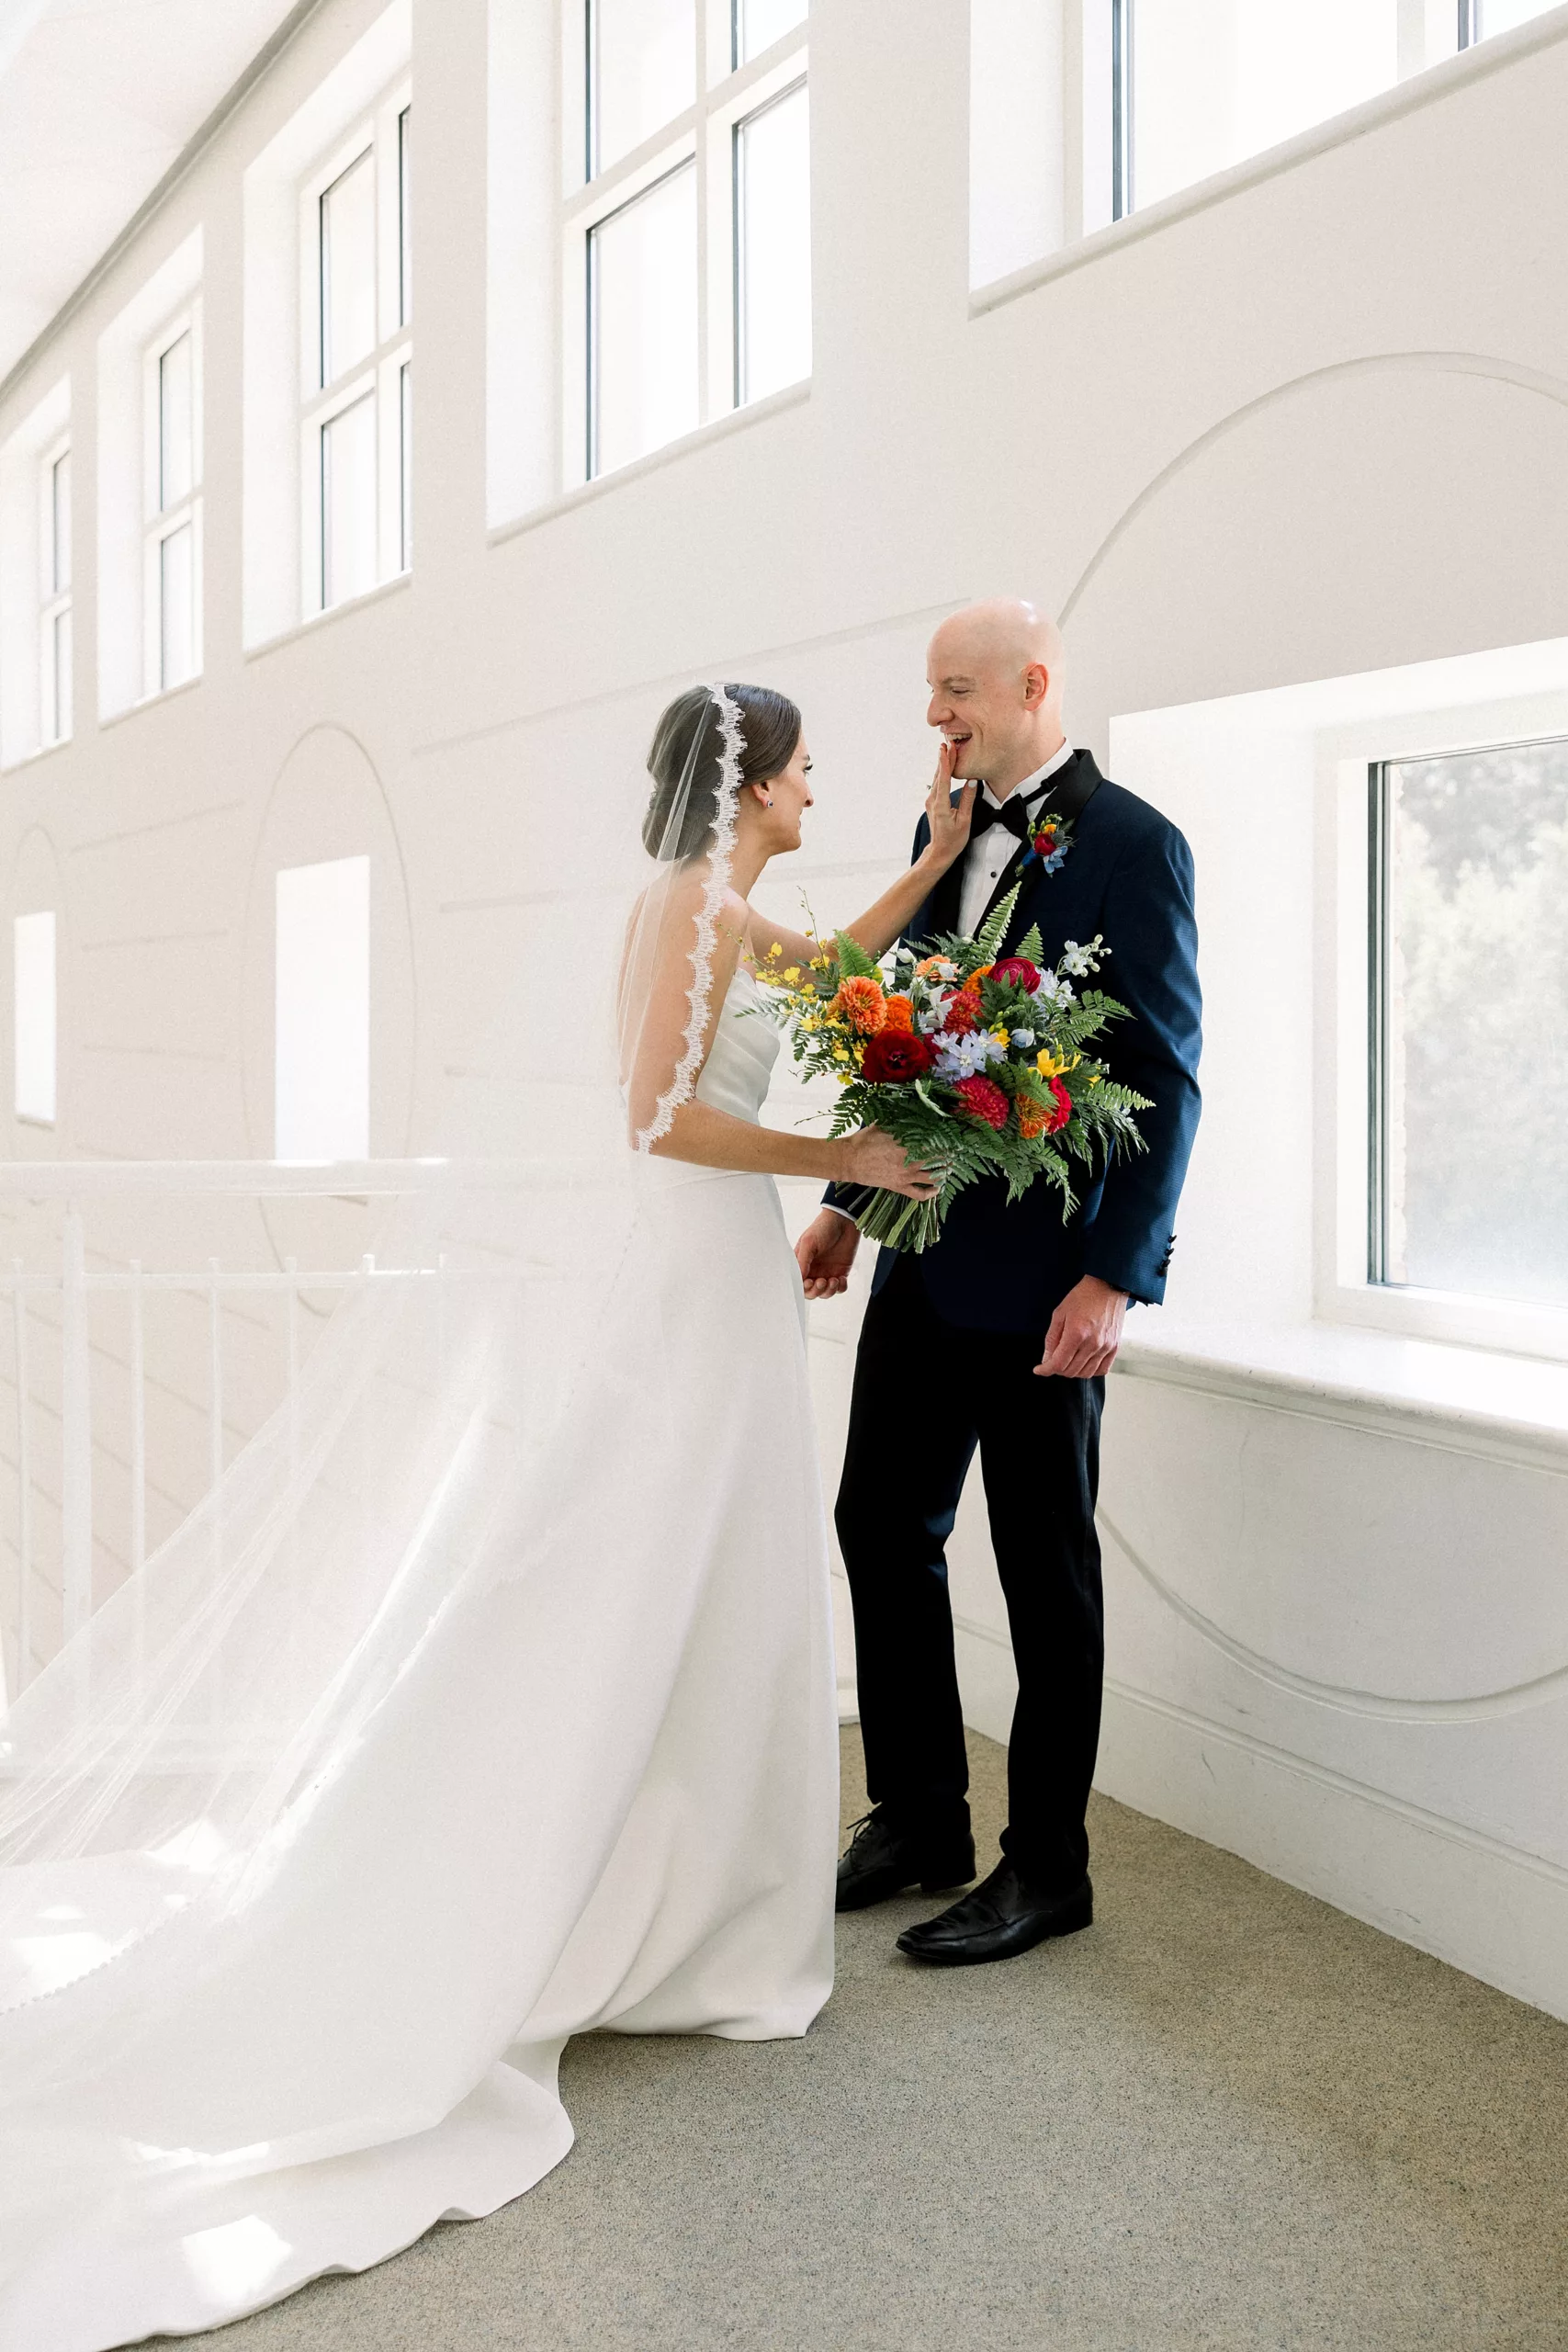 A bride pushes her groom's chin back up as he sees her for the first time in her dress in a white building